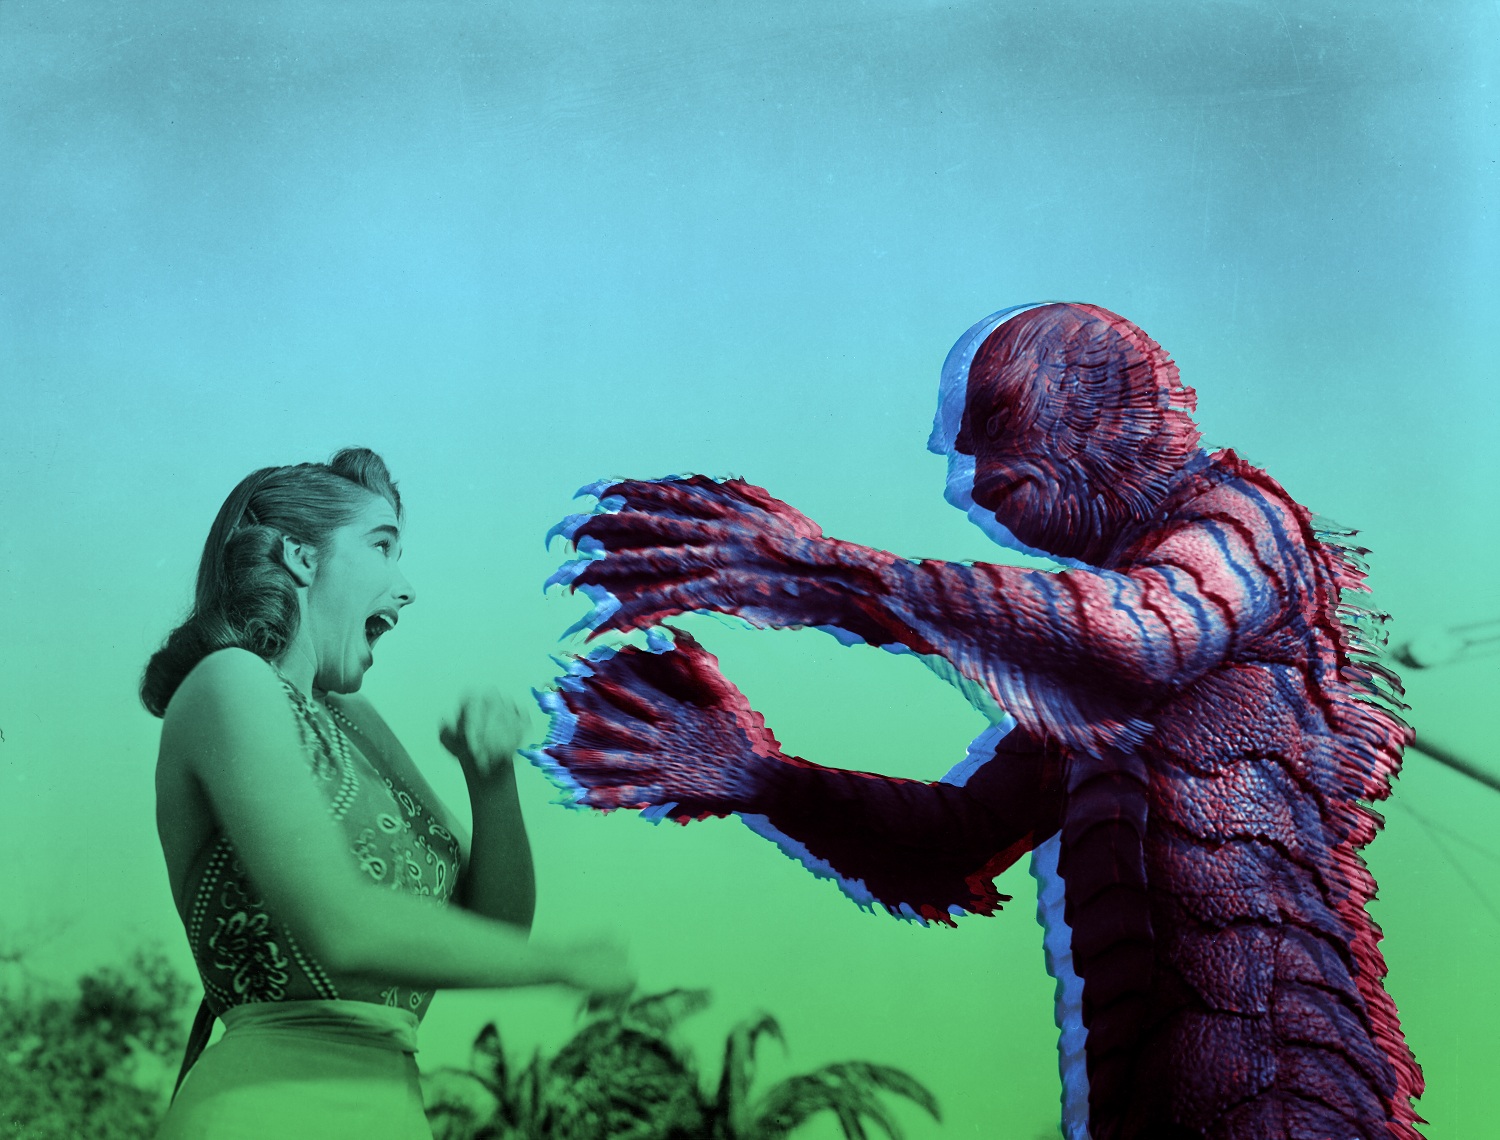 Julie Adams and the Gill Man in CREATURE FROM THE BLACK LAGOON, 1954.